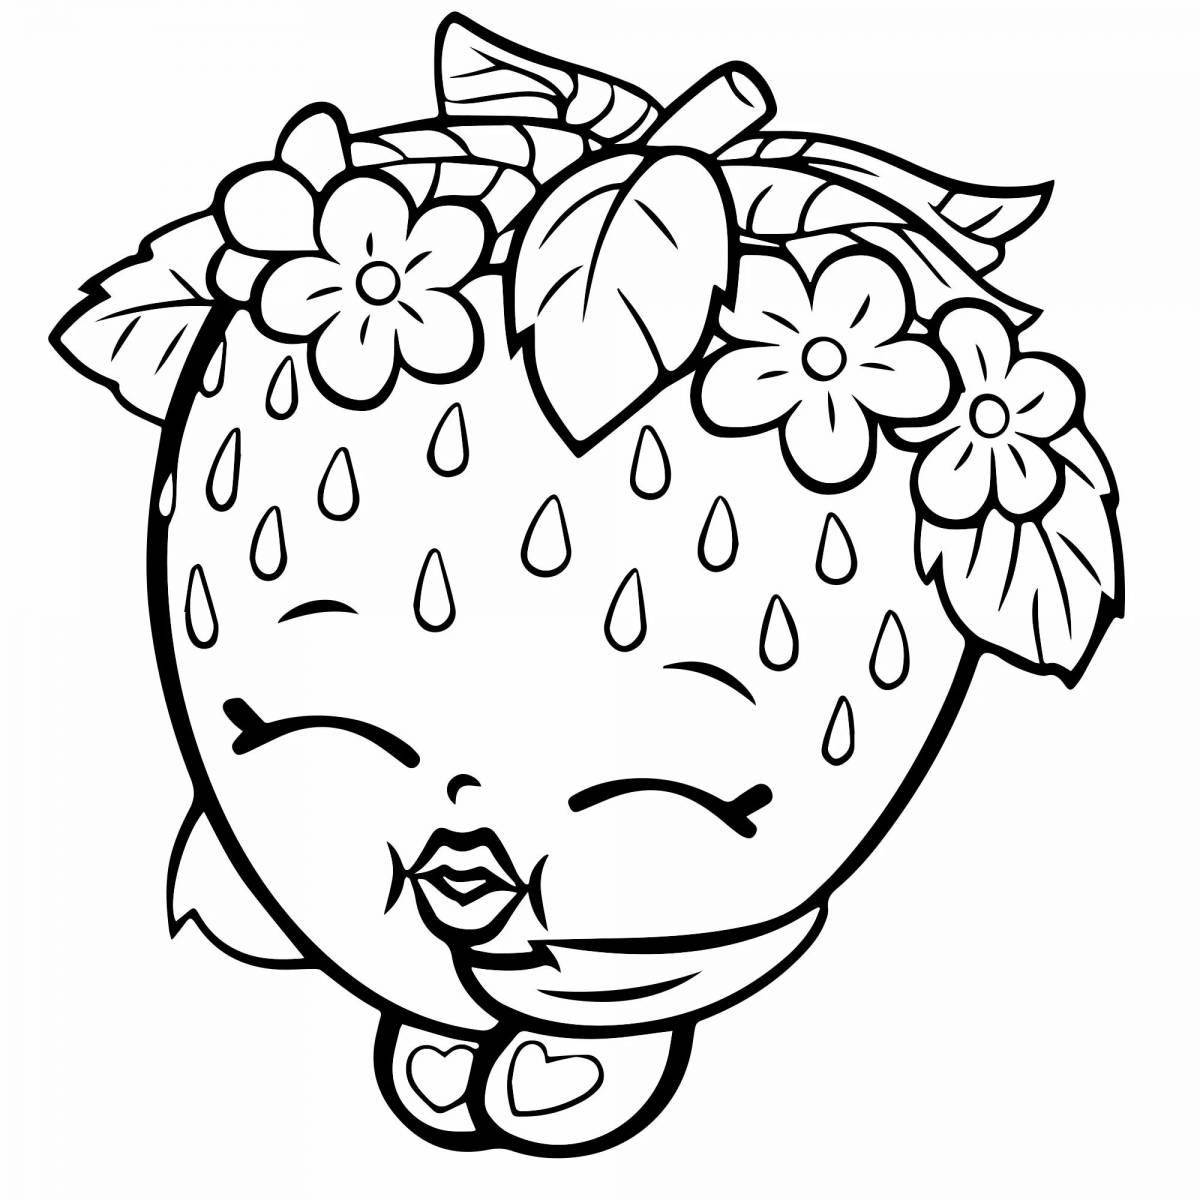 Coloring pages with shimmering strawberries for kids